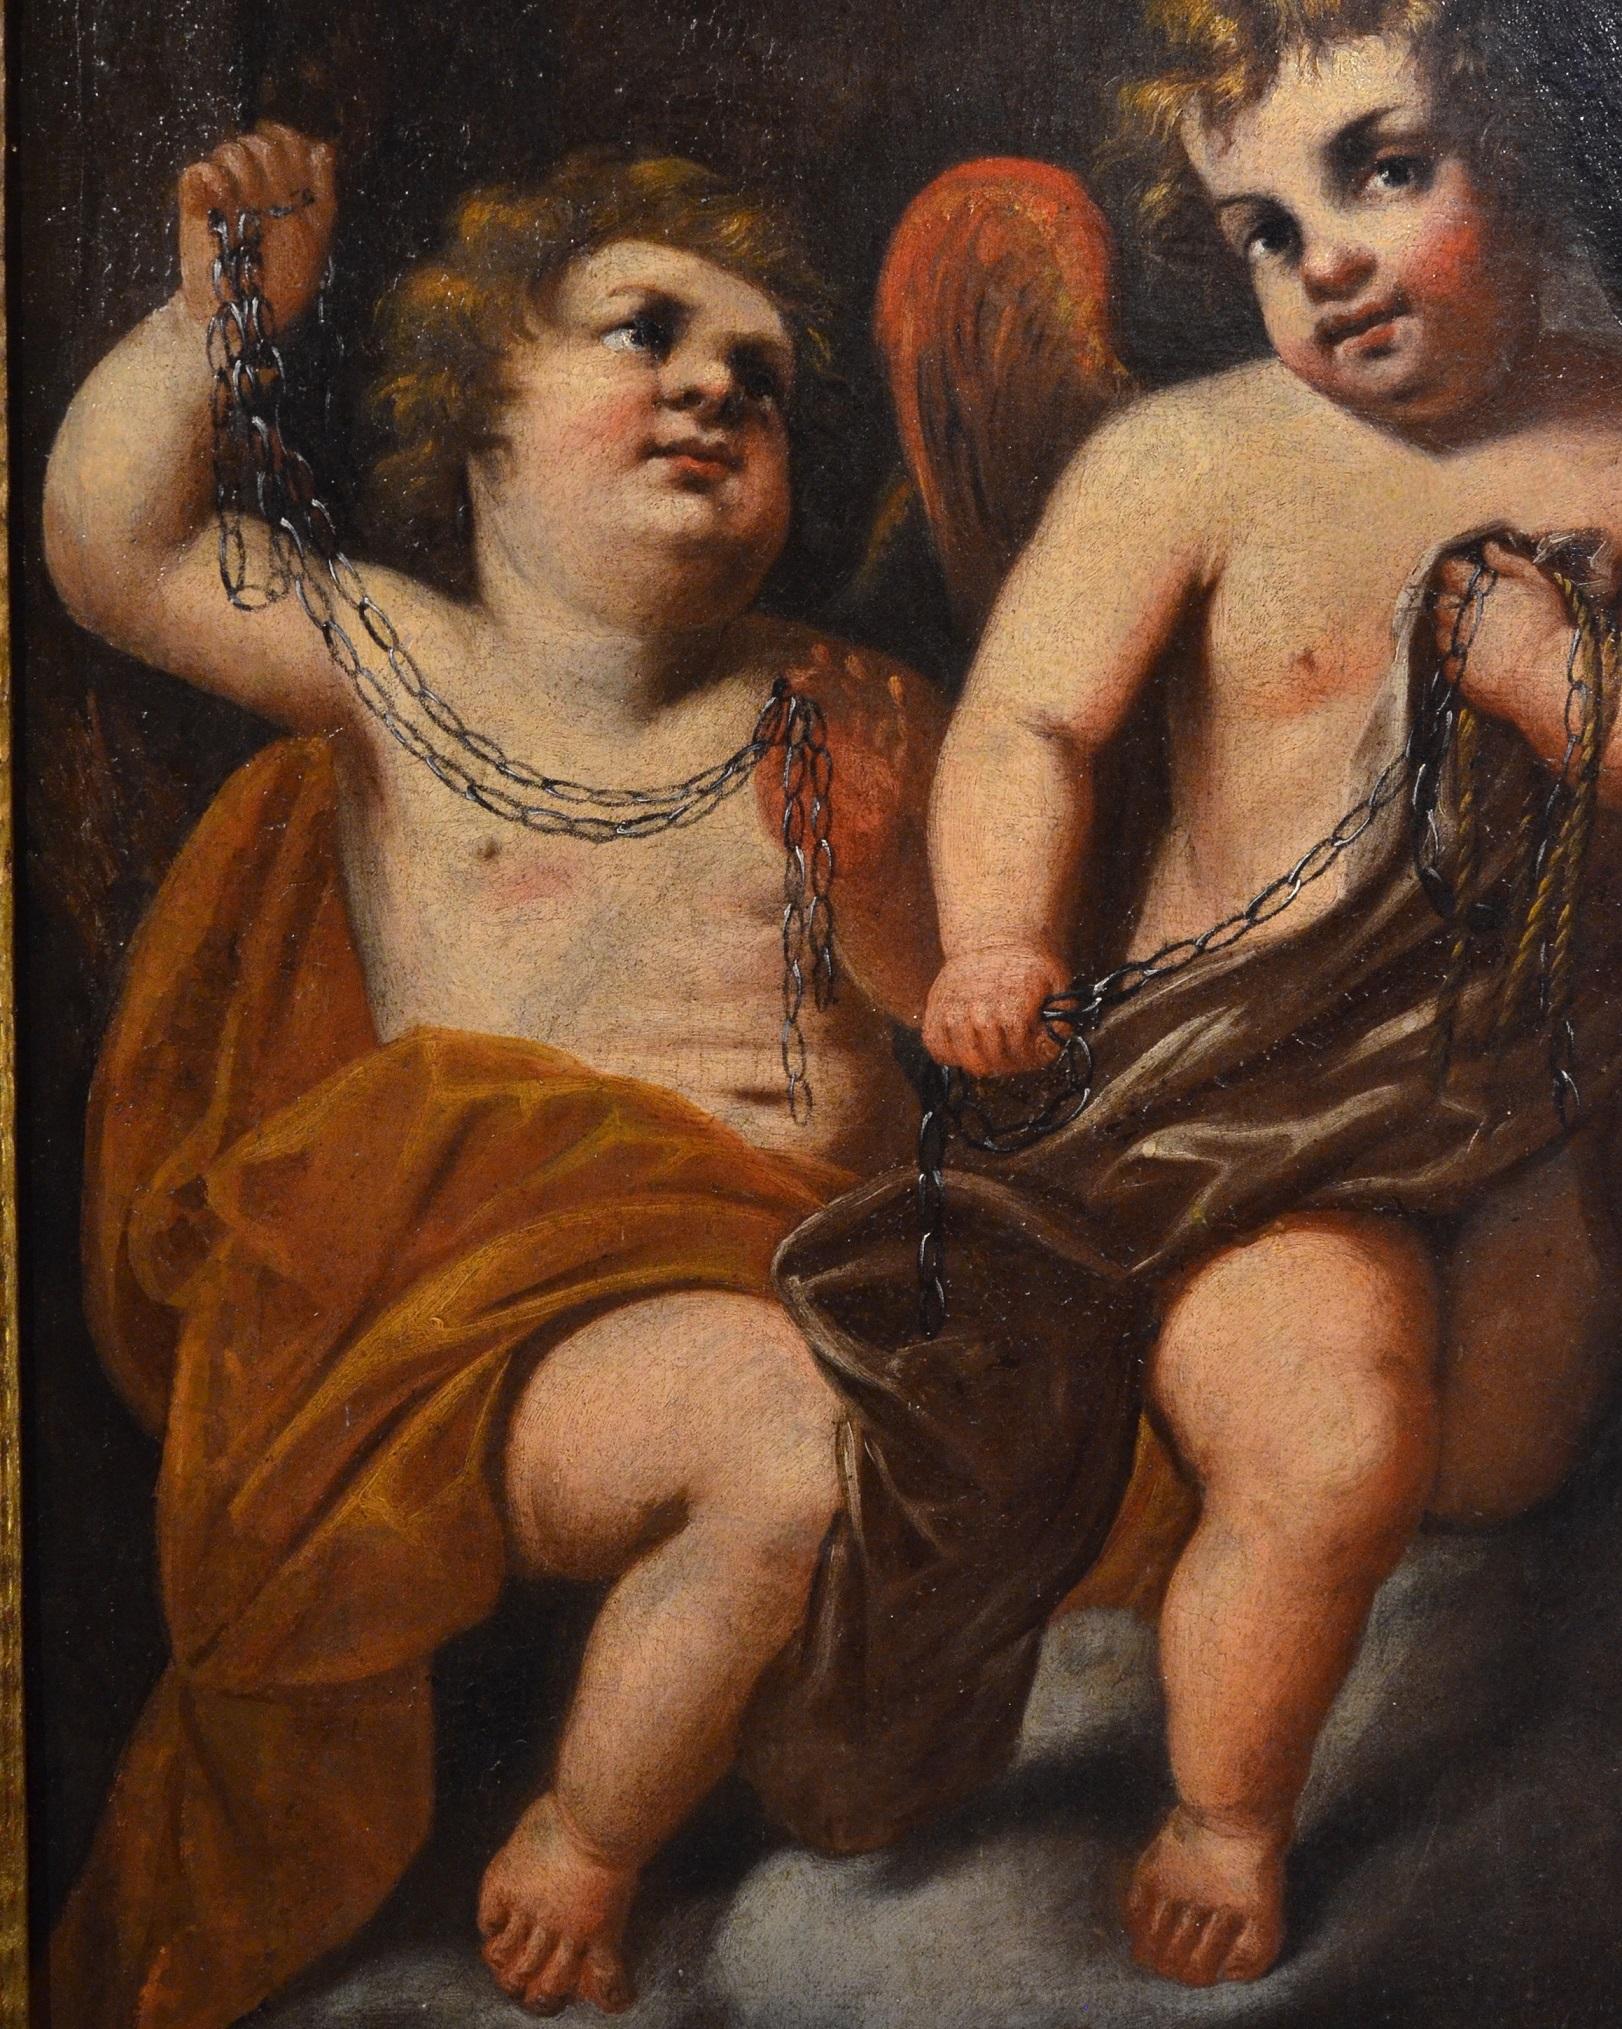 Winged Putti Paint Oil on canvas Baroque 17th Century Mitological Michelangelo  For Sale 2